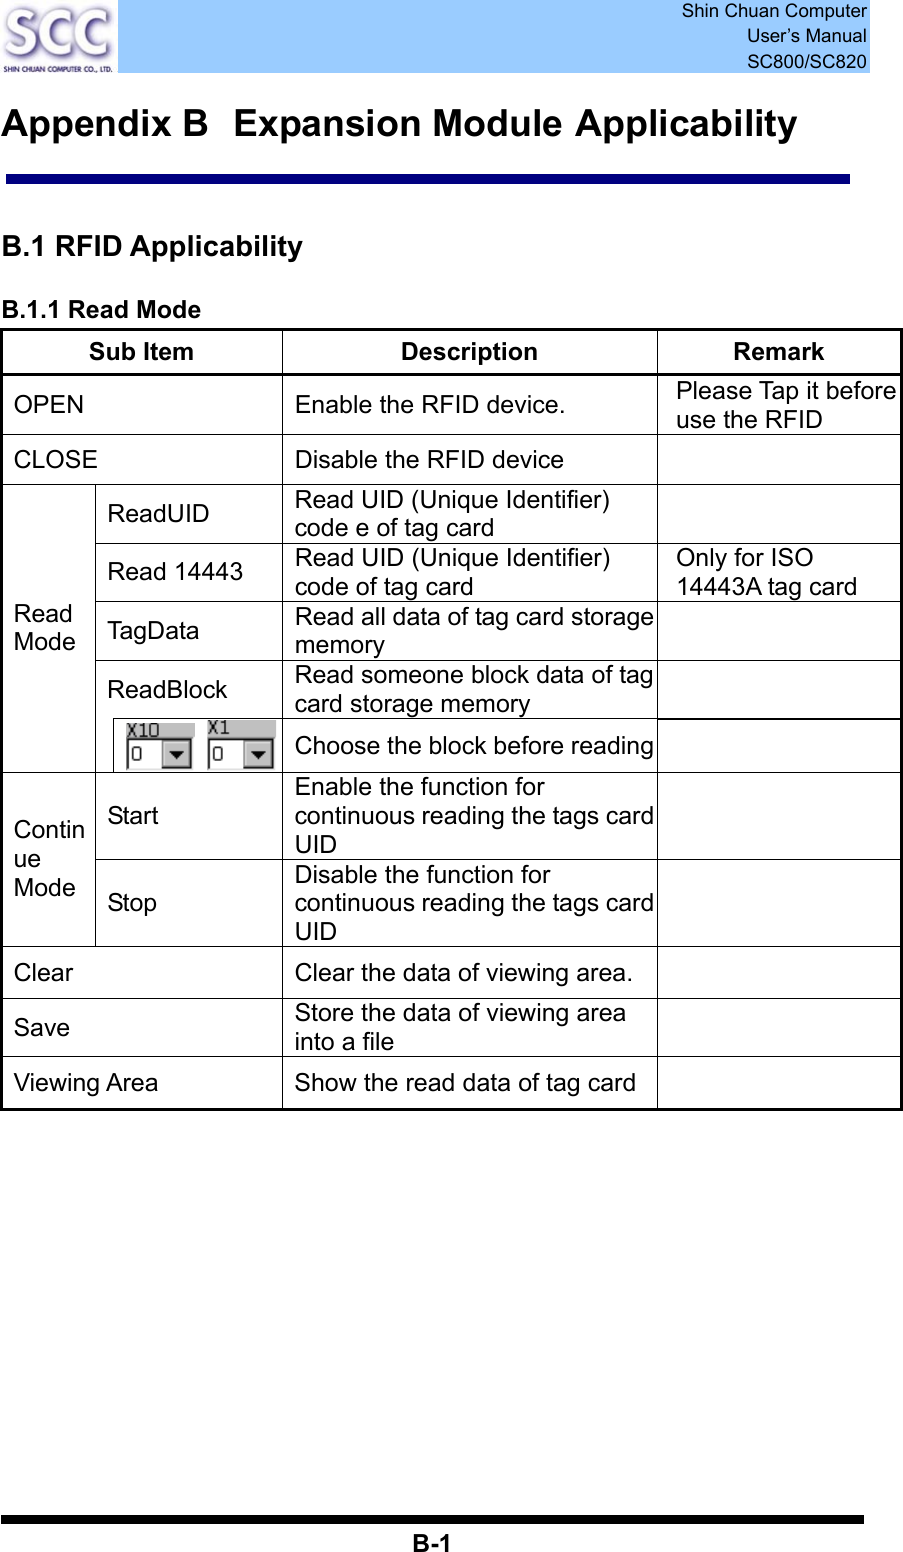  Shin Chuan Computer User’s Manual SC800/SC820  B-1 Appendix B   Expansion Module Applicability   B.1 RFID Applicability  B.1.1 Read Mode Sub Item  Description  Remark OPEN  Enable the RFID device.  Please Tap it before use the RFID CLOSE  Disable the RFID device   ReadUID  Read UID (Unique Identifier)   code e of tag card   Read 14443  Read UID (Unique Identifier) code of tag card Only for ISO 14443A tag card TagData  Read all data of tag card storage memory   ReadBlock  Read someone block data of tag card storage memory   Read Mode      Choose the block before reading  Start Enable the function for continuous reading the tags card UID  Continue Mode  Stop Disable the function for continuous reading the tags card UID  Clear  Clear the data of viewing area.   Save  Store the data of viewing area into a file   Viewing Area  Show the read data of tag card                       